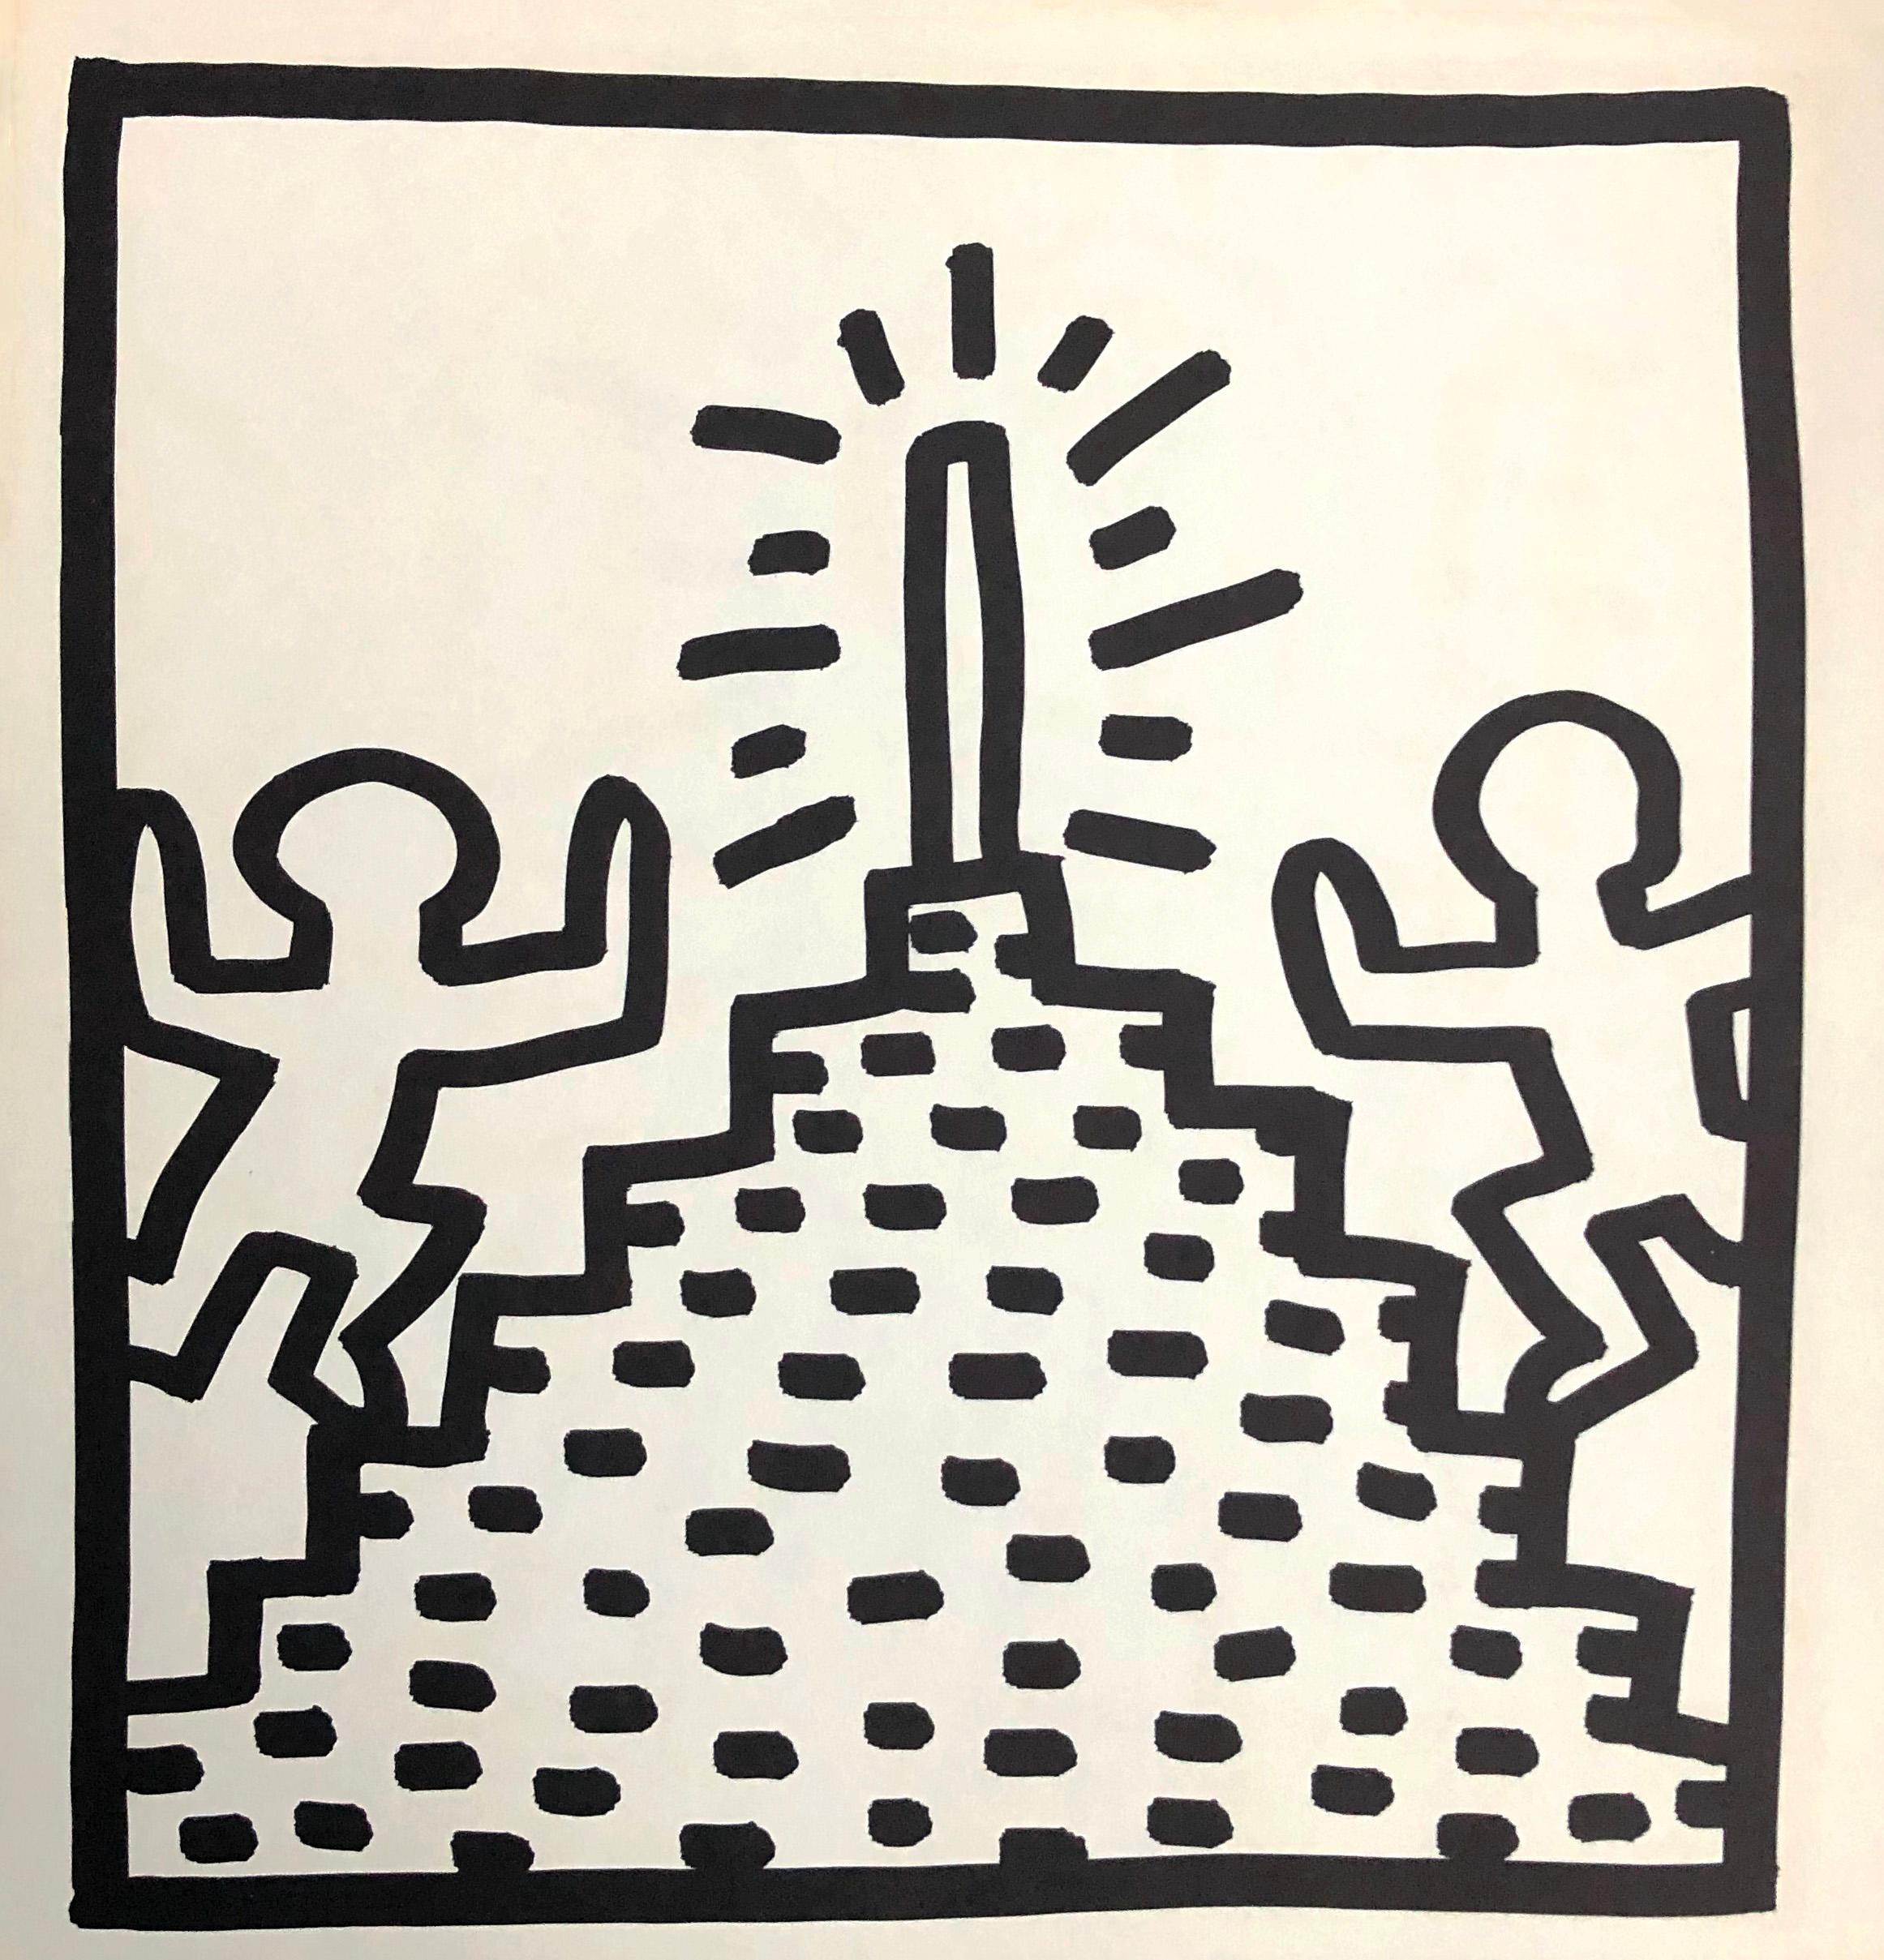 Keith Haring (untitled) Pyramid Lithograph, 1982
Double-sided offset lithograph published by Tony Shafrazi Gallery, New York, 1982 from an edition of 2000. 

Single sheet lithograph from the seminal spiral bound, early monograph showcasing Haring's